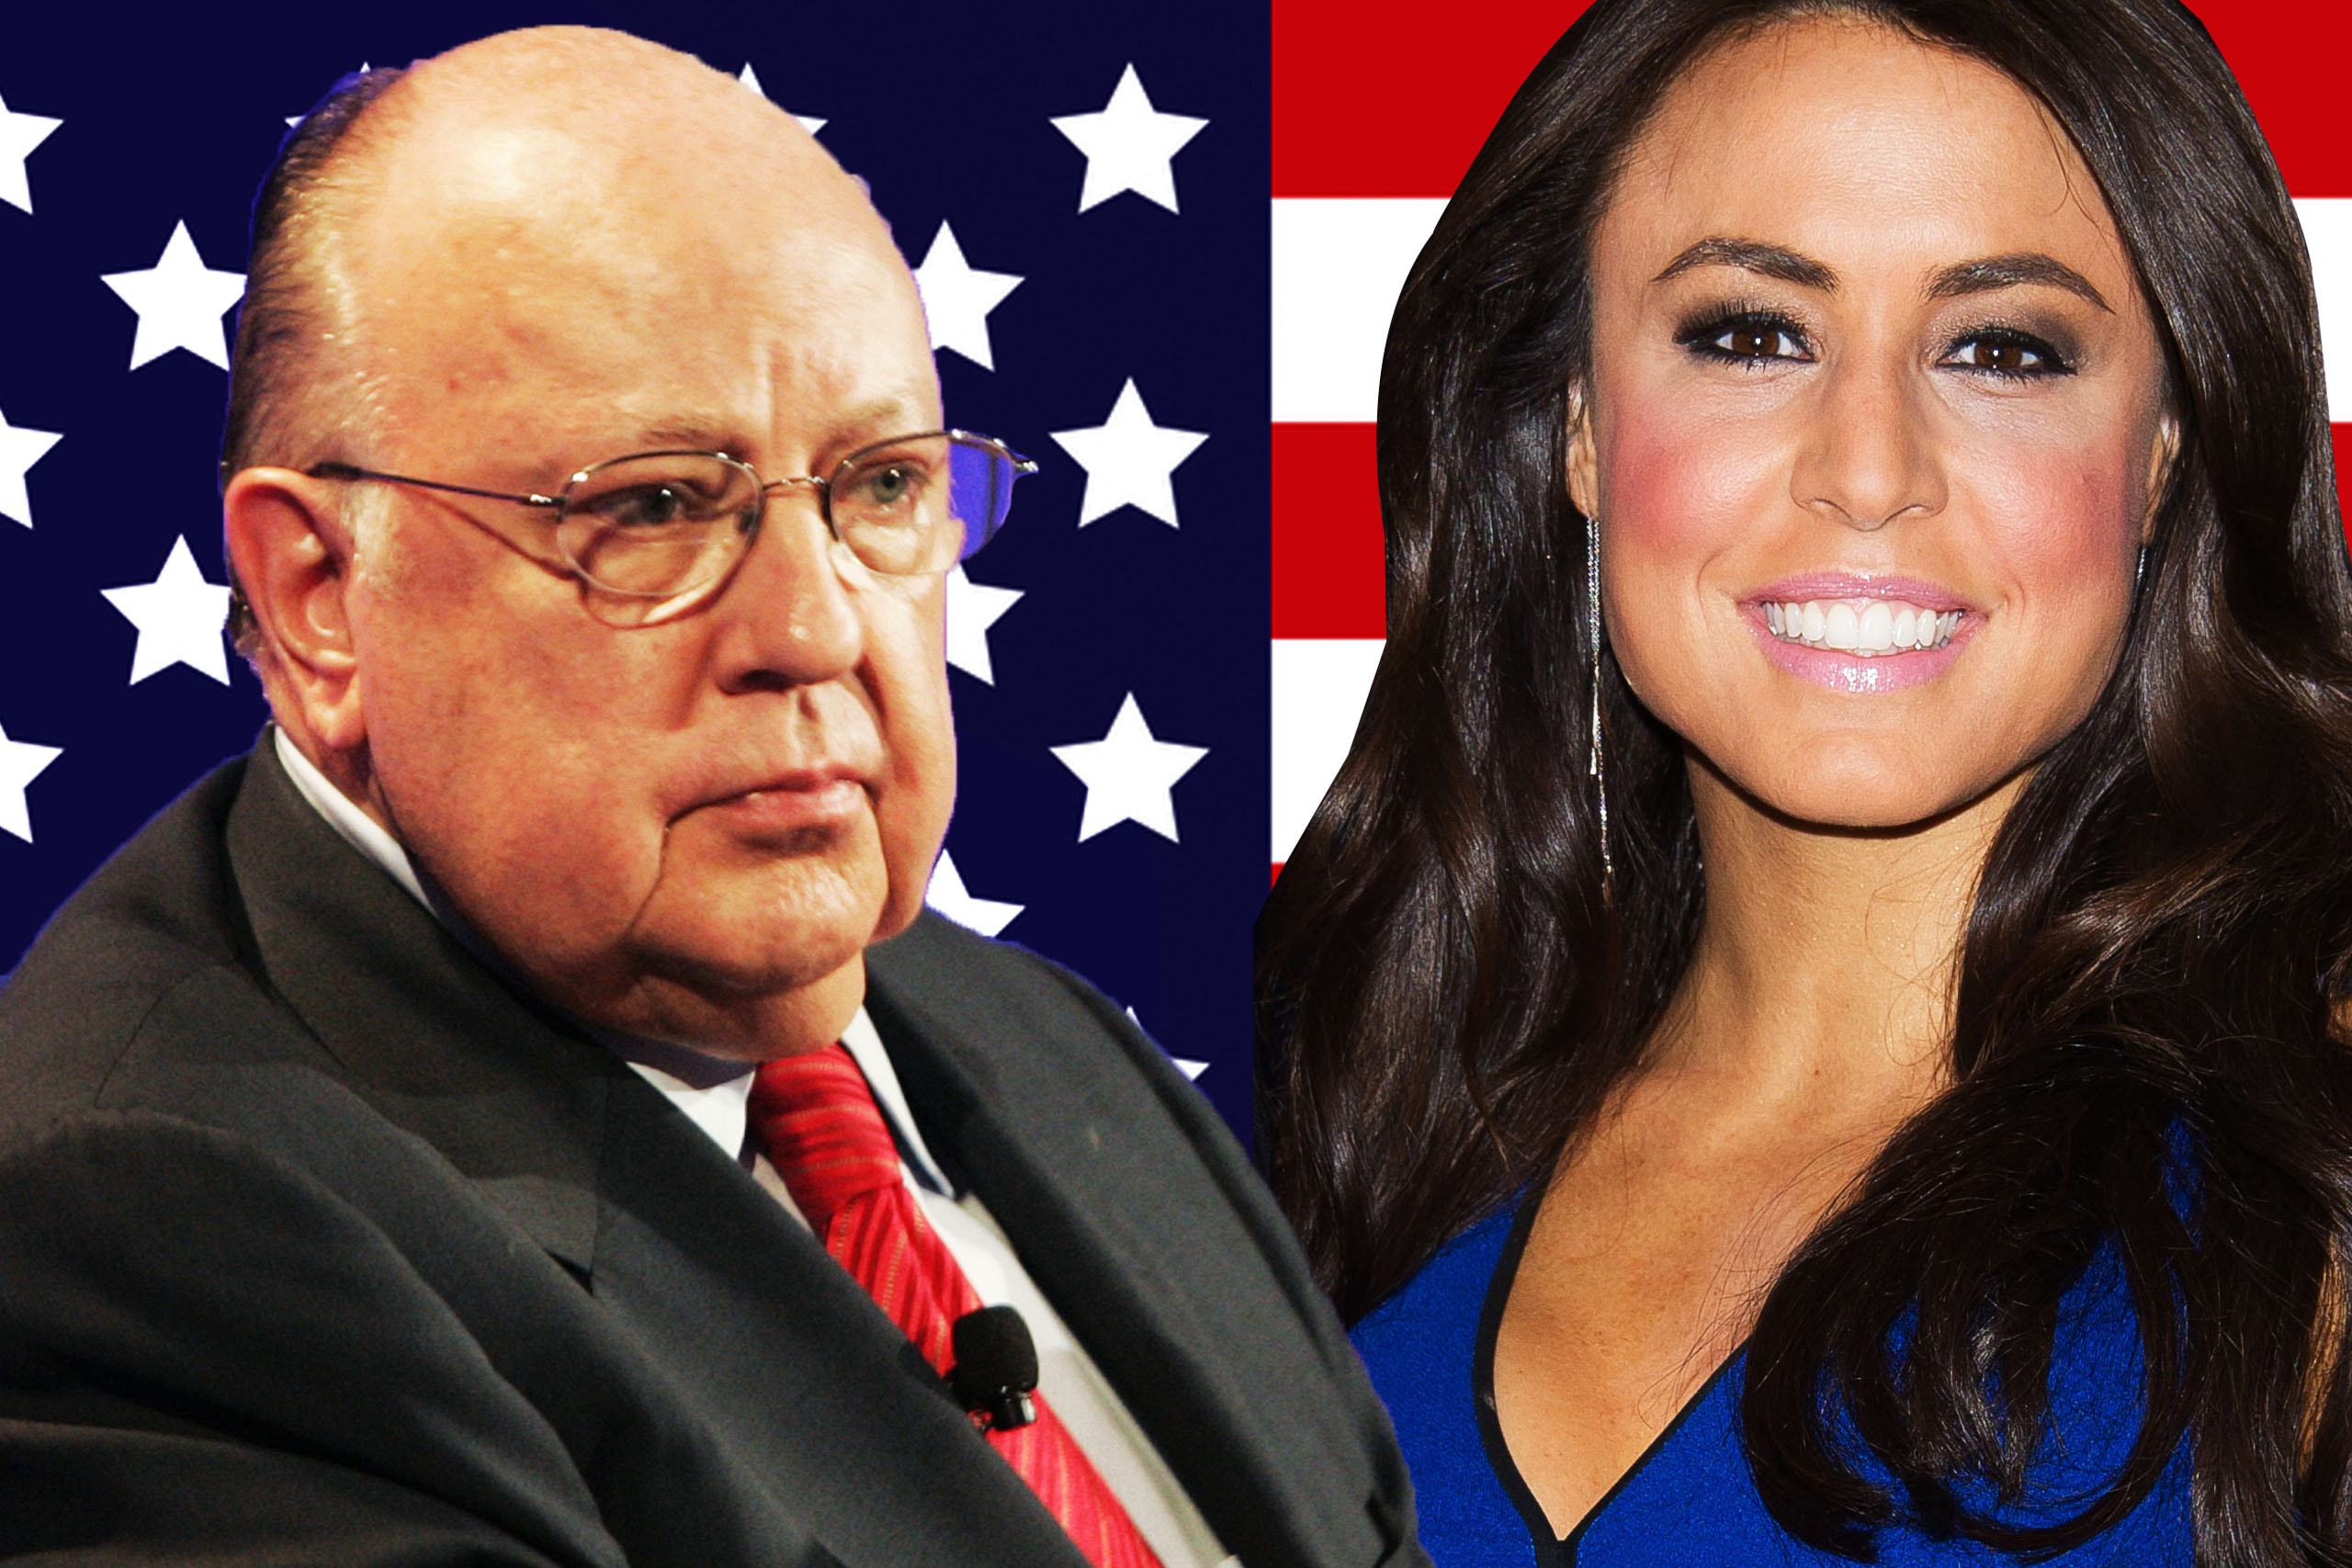 Andrea Tantaros filed sexual harassment lawsuit against former Fox News CEO Roger Alies in 2016.